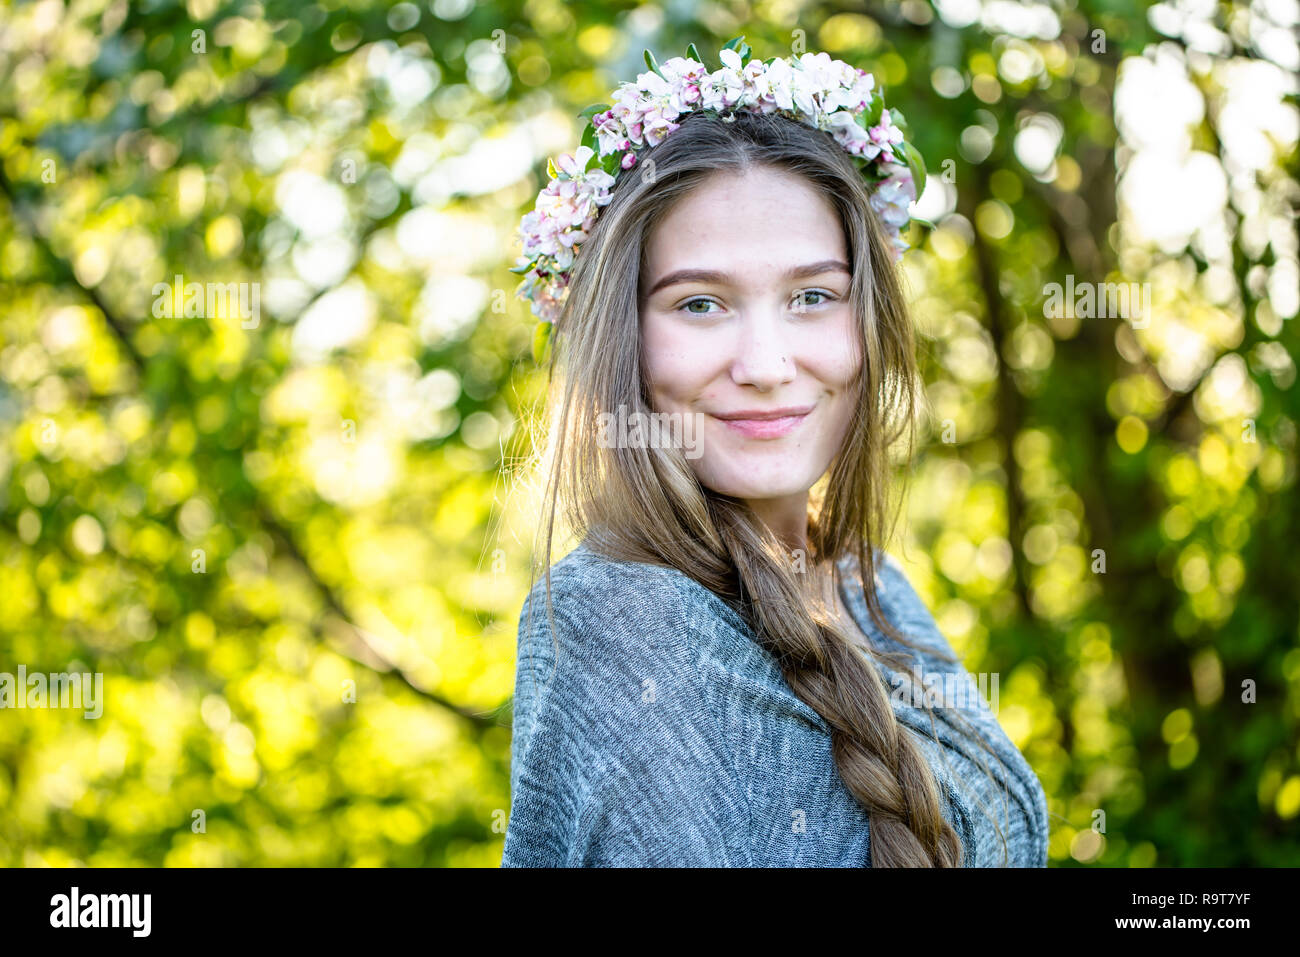 Natural beauty of smiling girl face with beautiful skin, braid and floral wreath on head. Young woman, spring portrait, outdoors Stock Photo